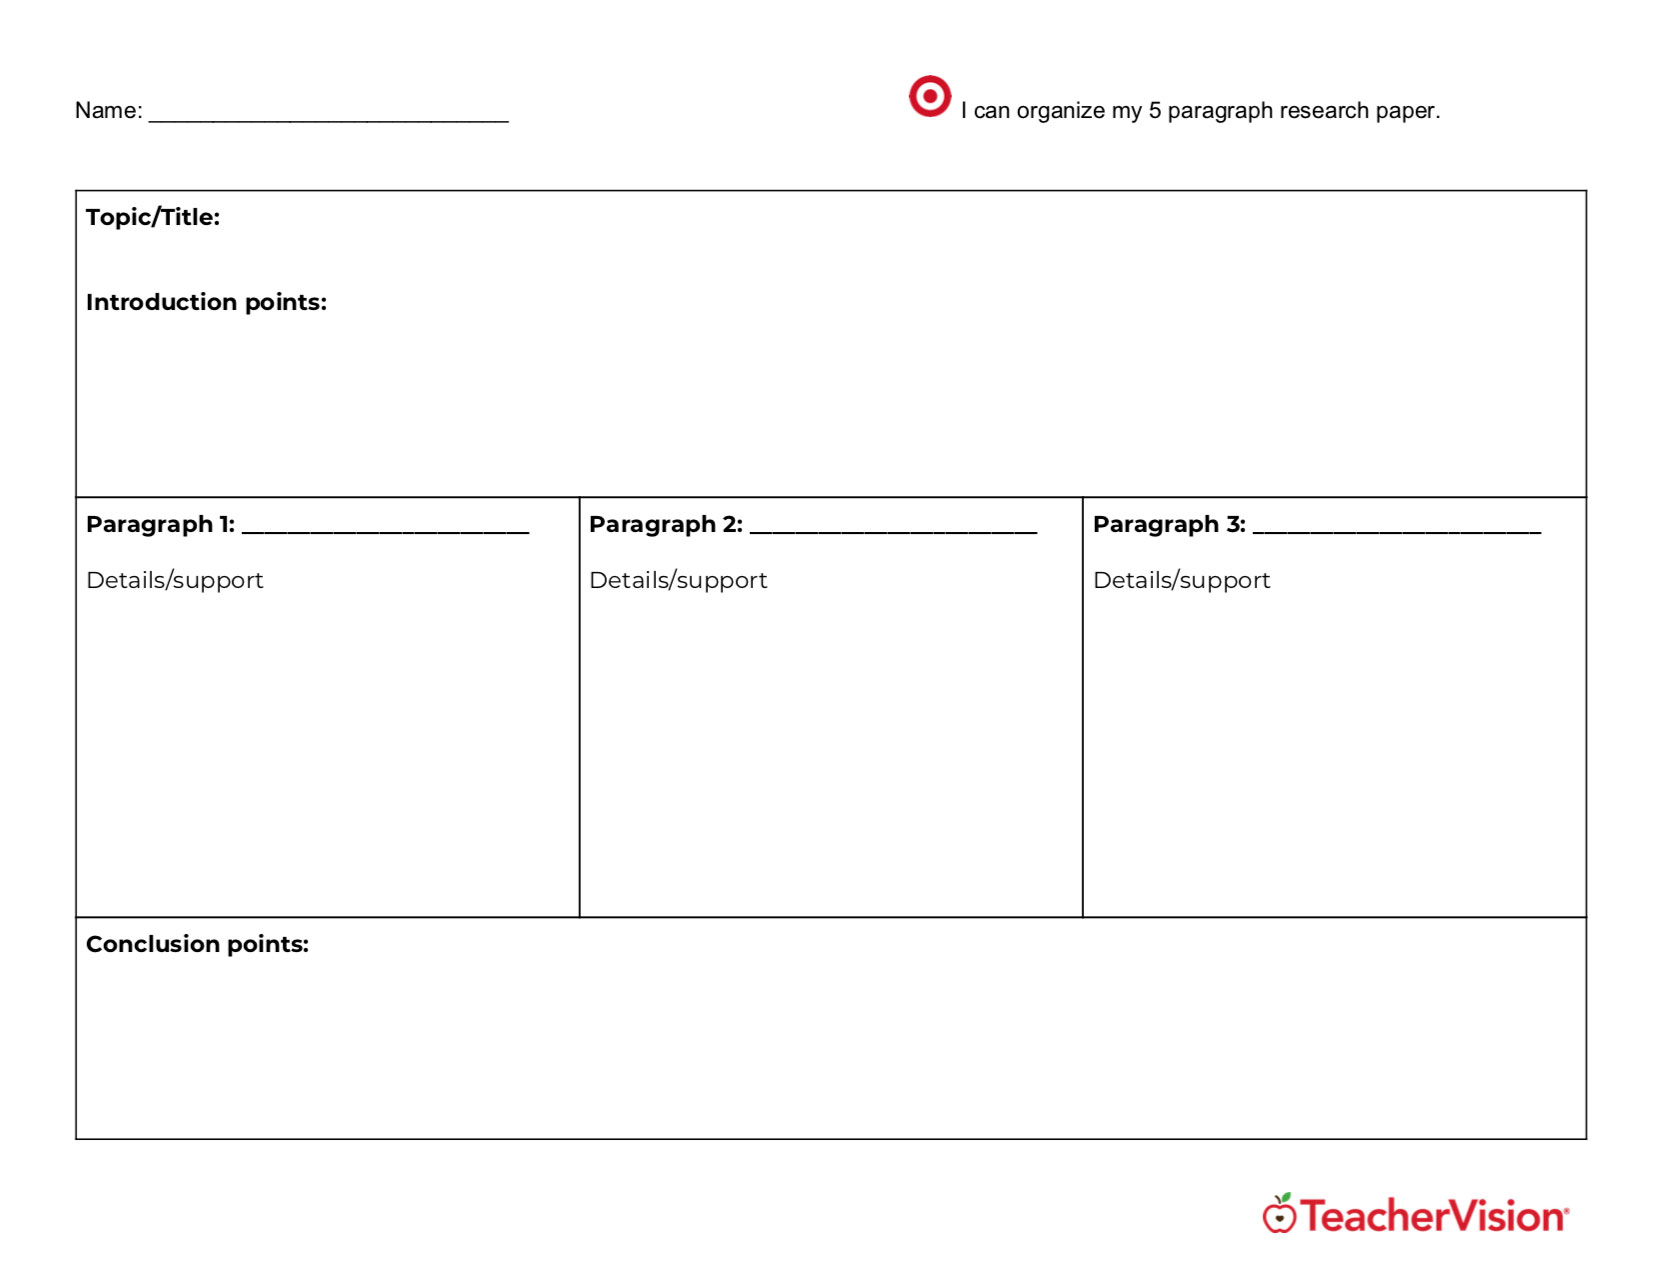 Writing a Research Paper Graphic Organizer - TeacherVision